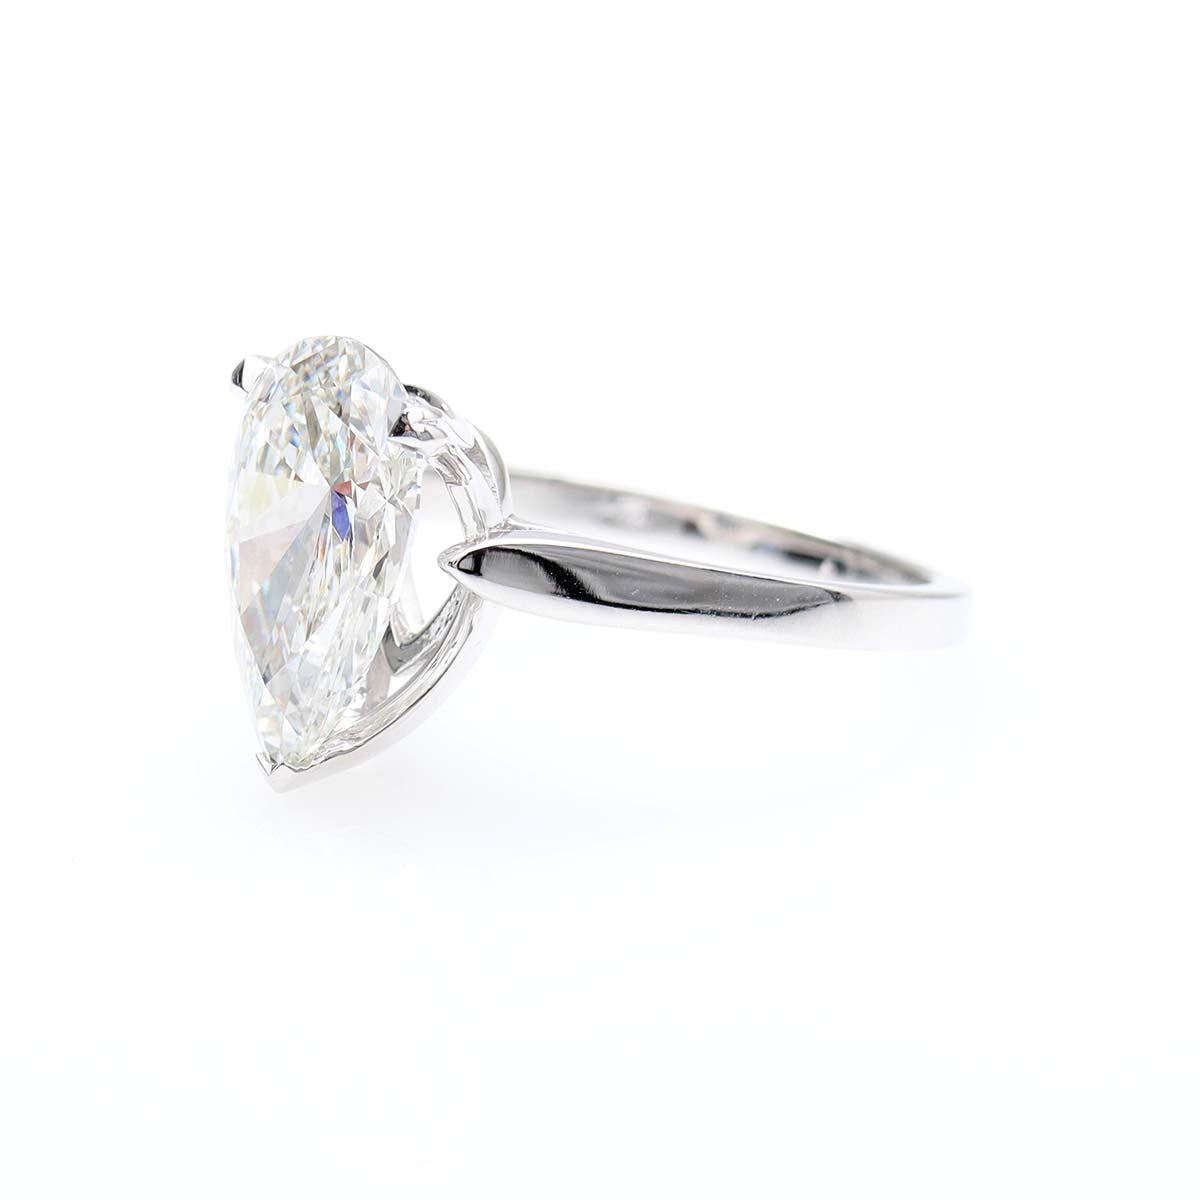 2.73 carat Pear Shape Diamond in Custom Cathedral Setting #3671PS-1